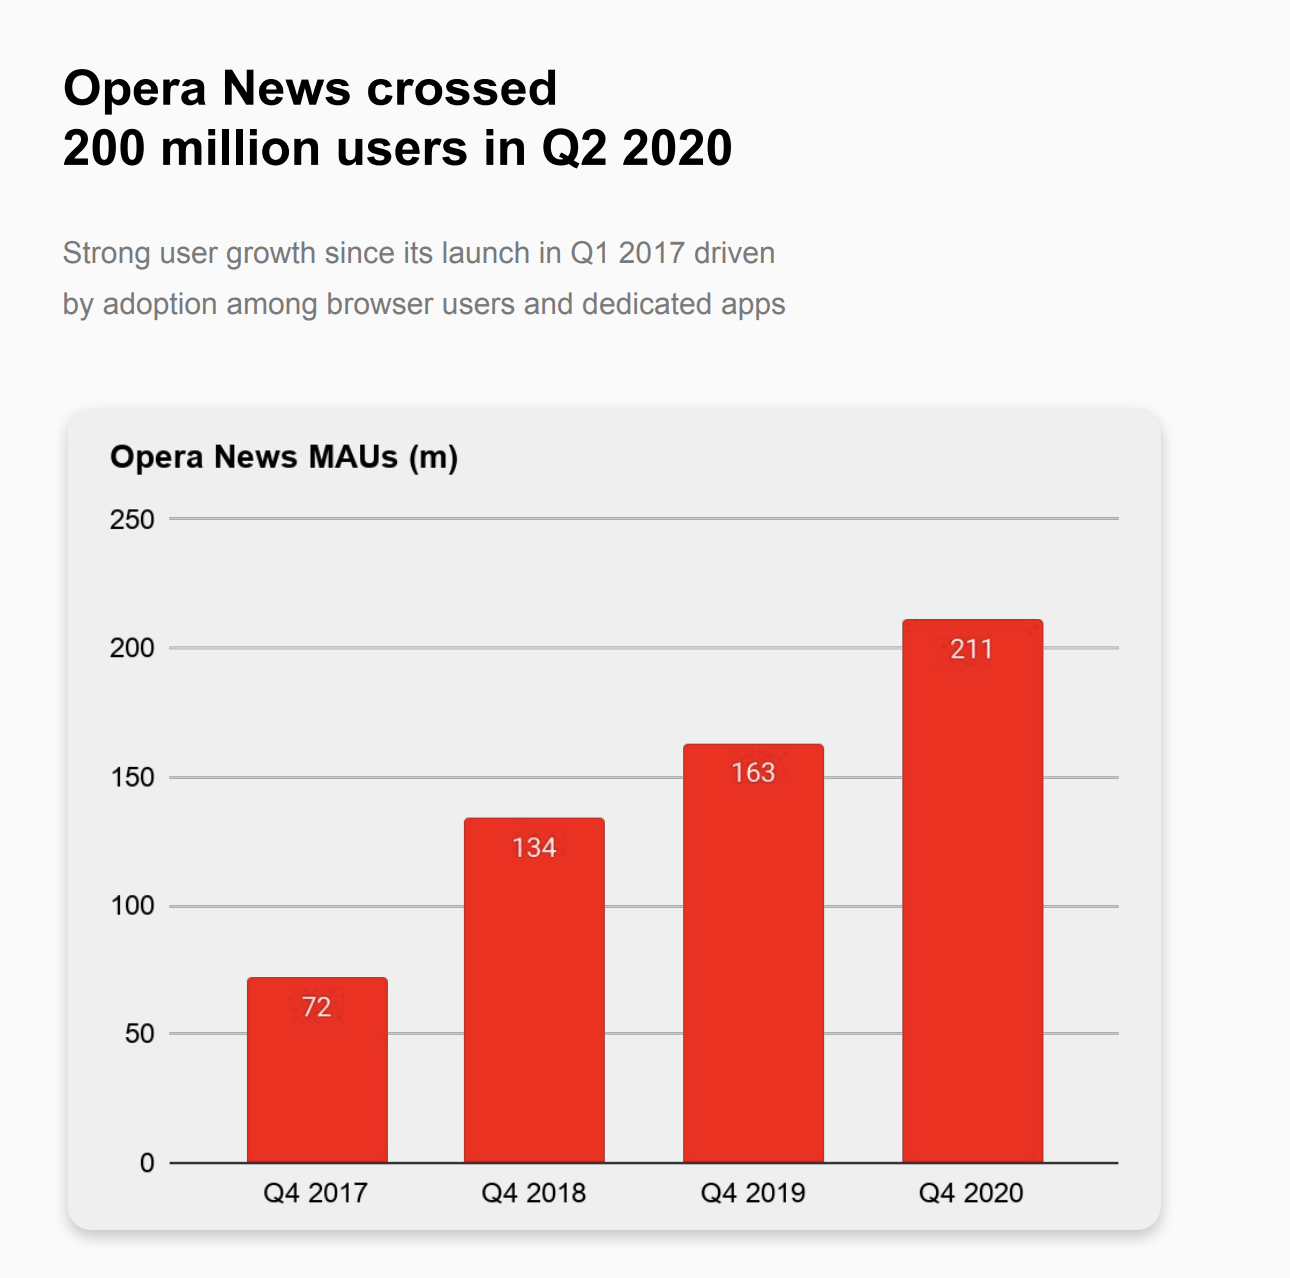 Opera's GX browser for gamers crosses 20 million monthly active